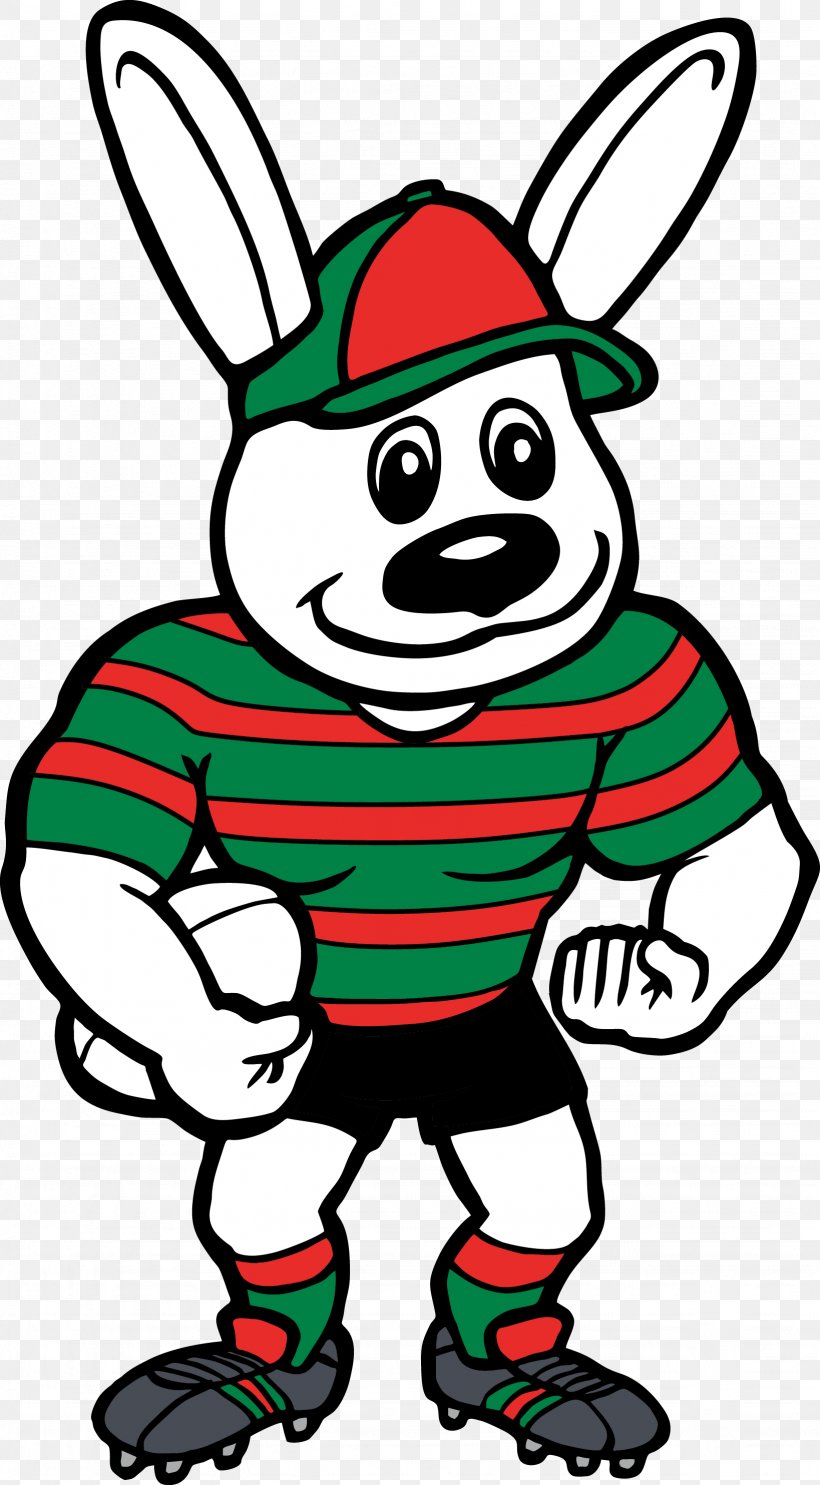 South Sydney Rabbitohs National Rugby League Manly Warringah Sea Eagles Sydney Roosters Canberra Raiders, PNG, 1638x2967px, South Sydney Rabbitohs, Art, Artwork, Black And White, Canberra Raiders Download Free